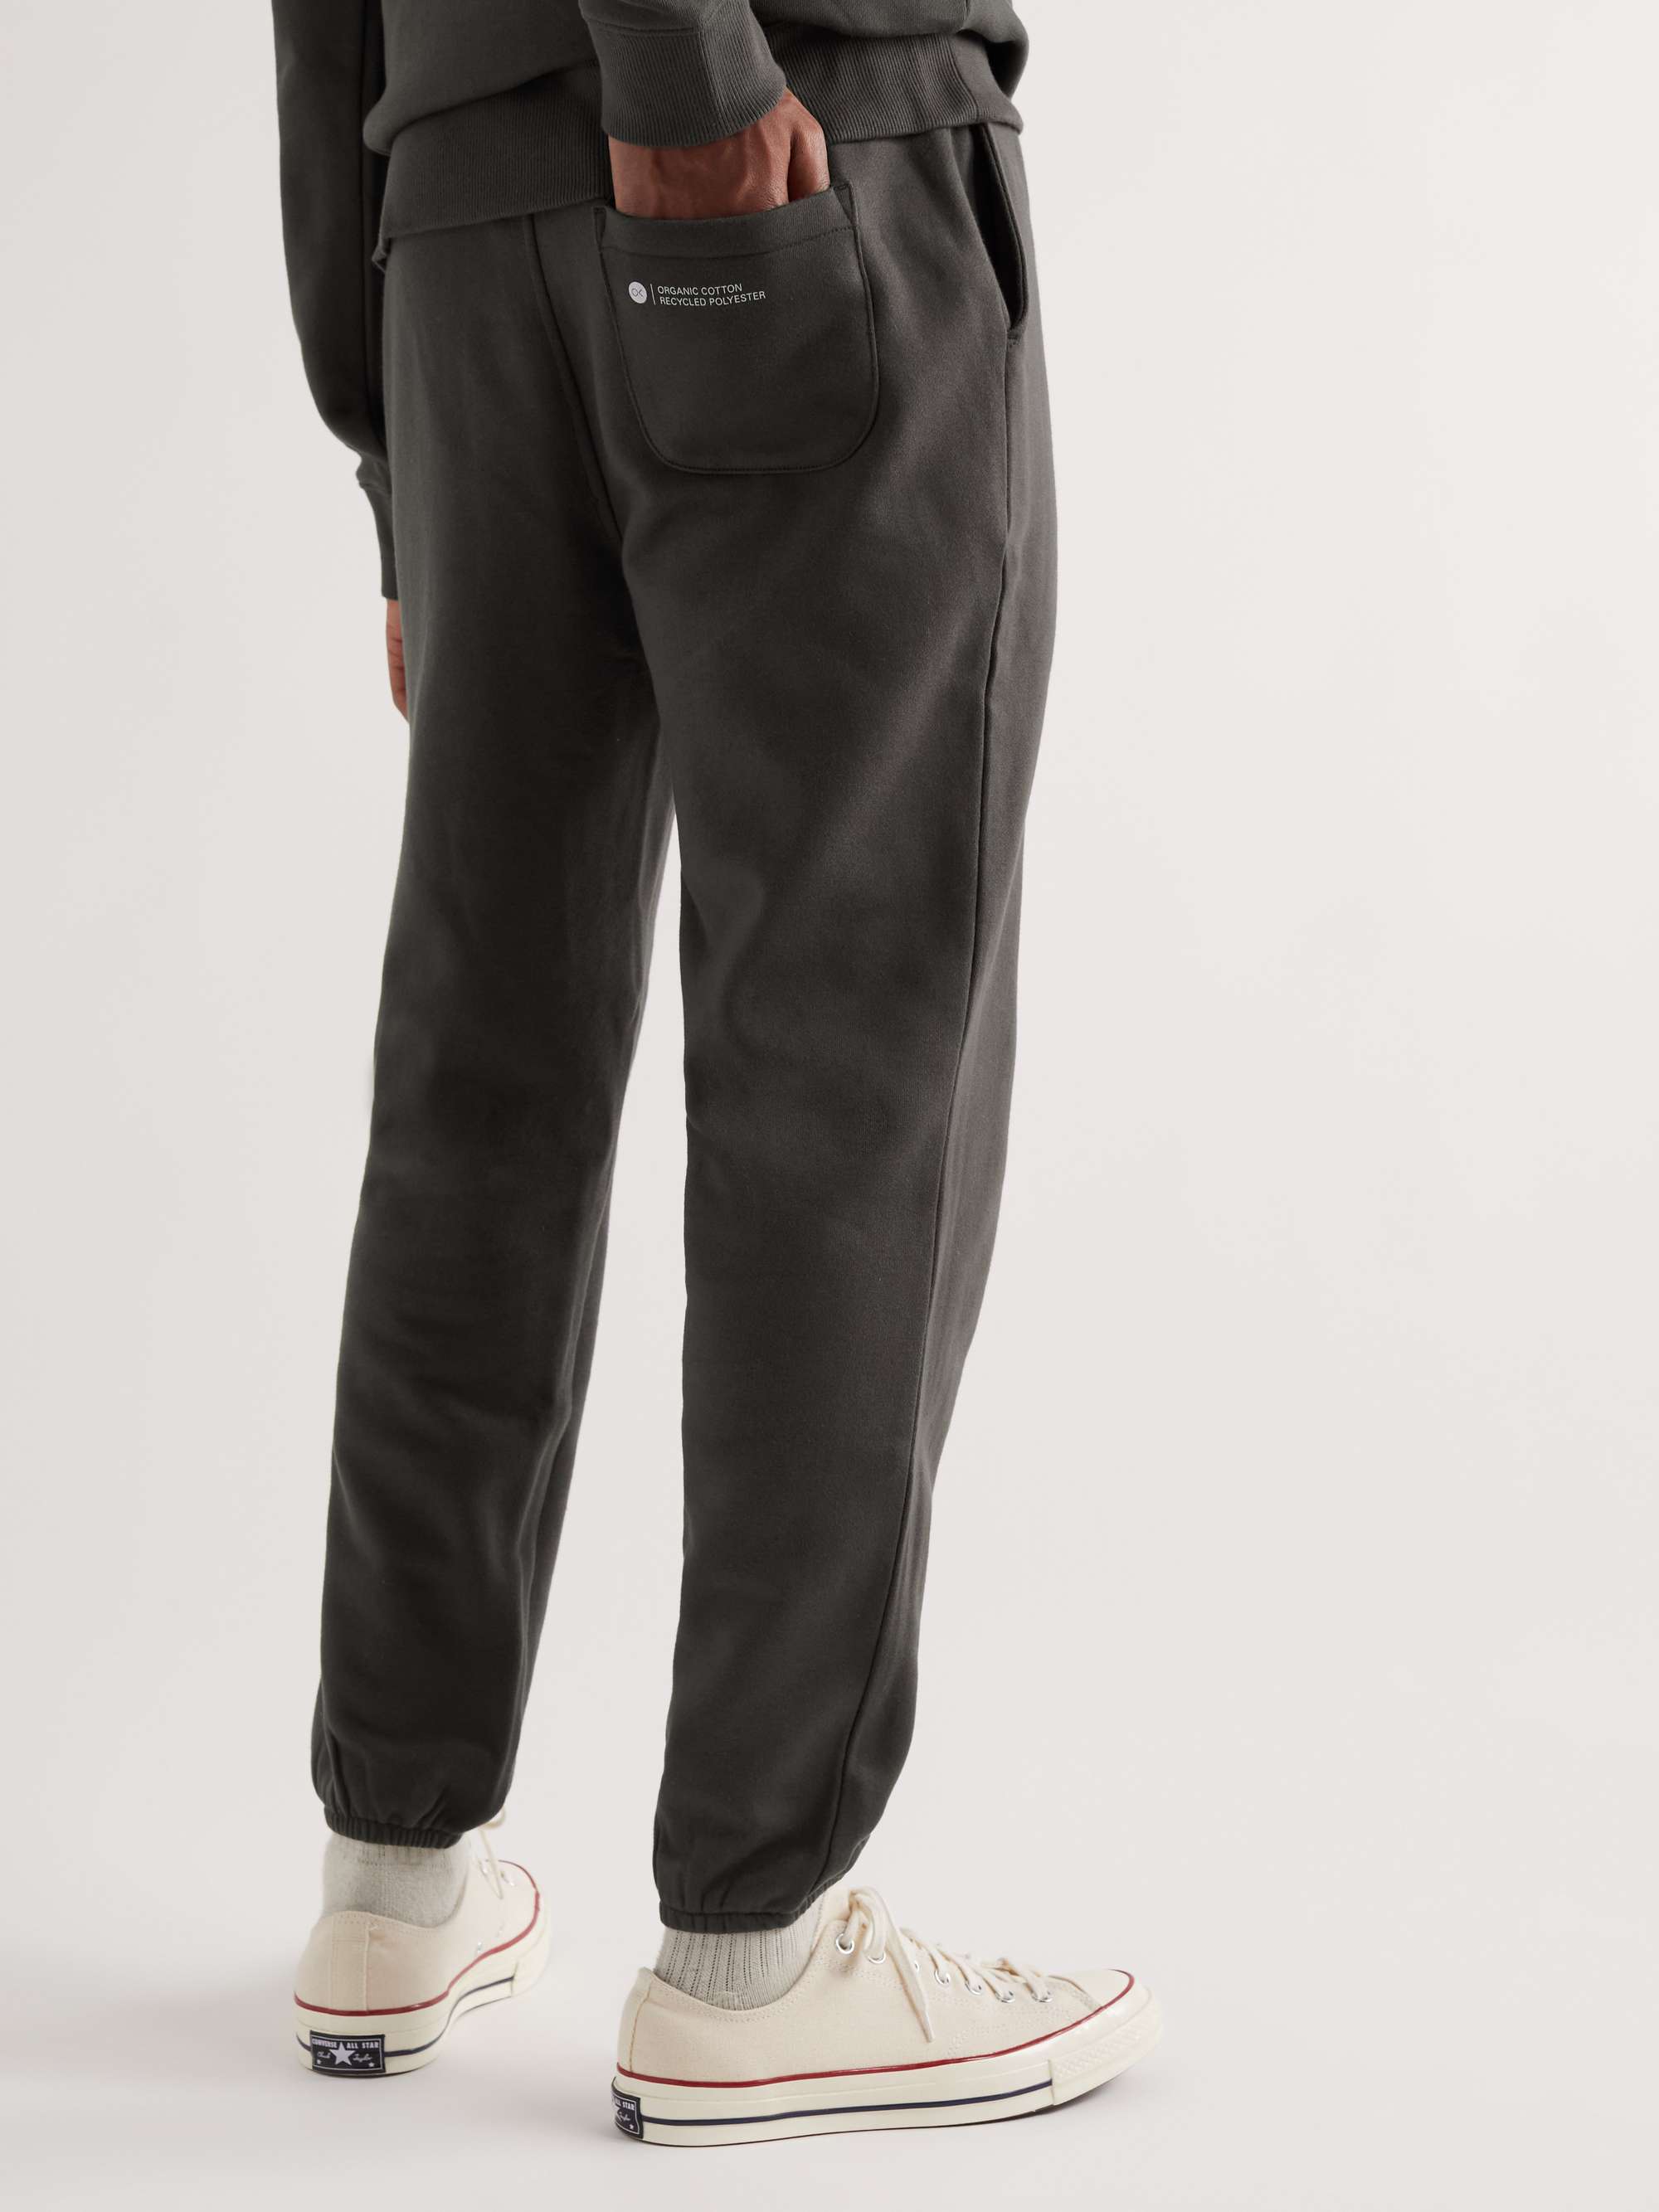 OUTERKNOWN All-Day Tapered Organic Cotton-Blend Jersey Sweatpants